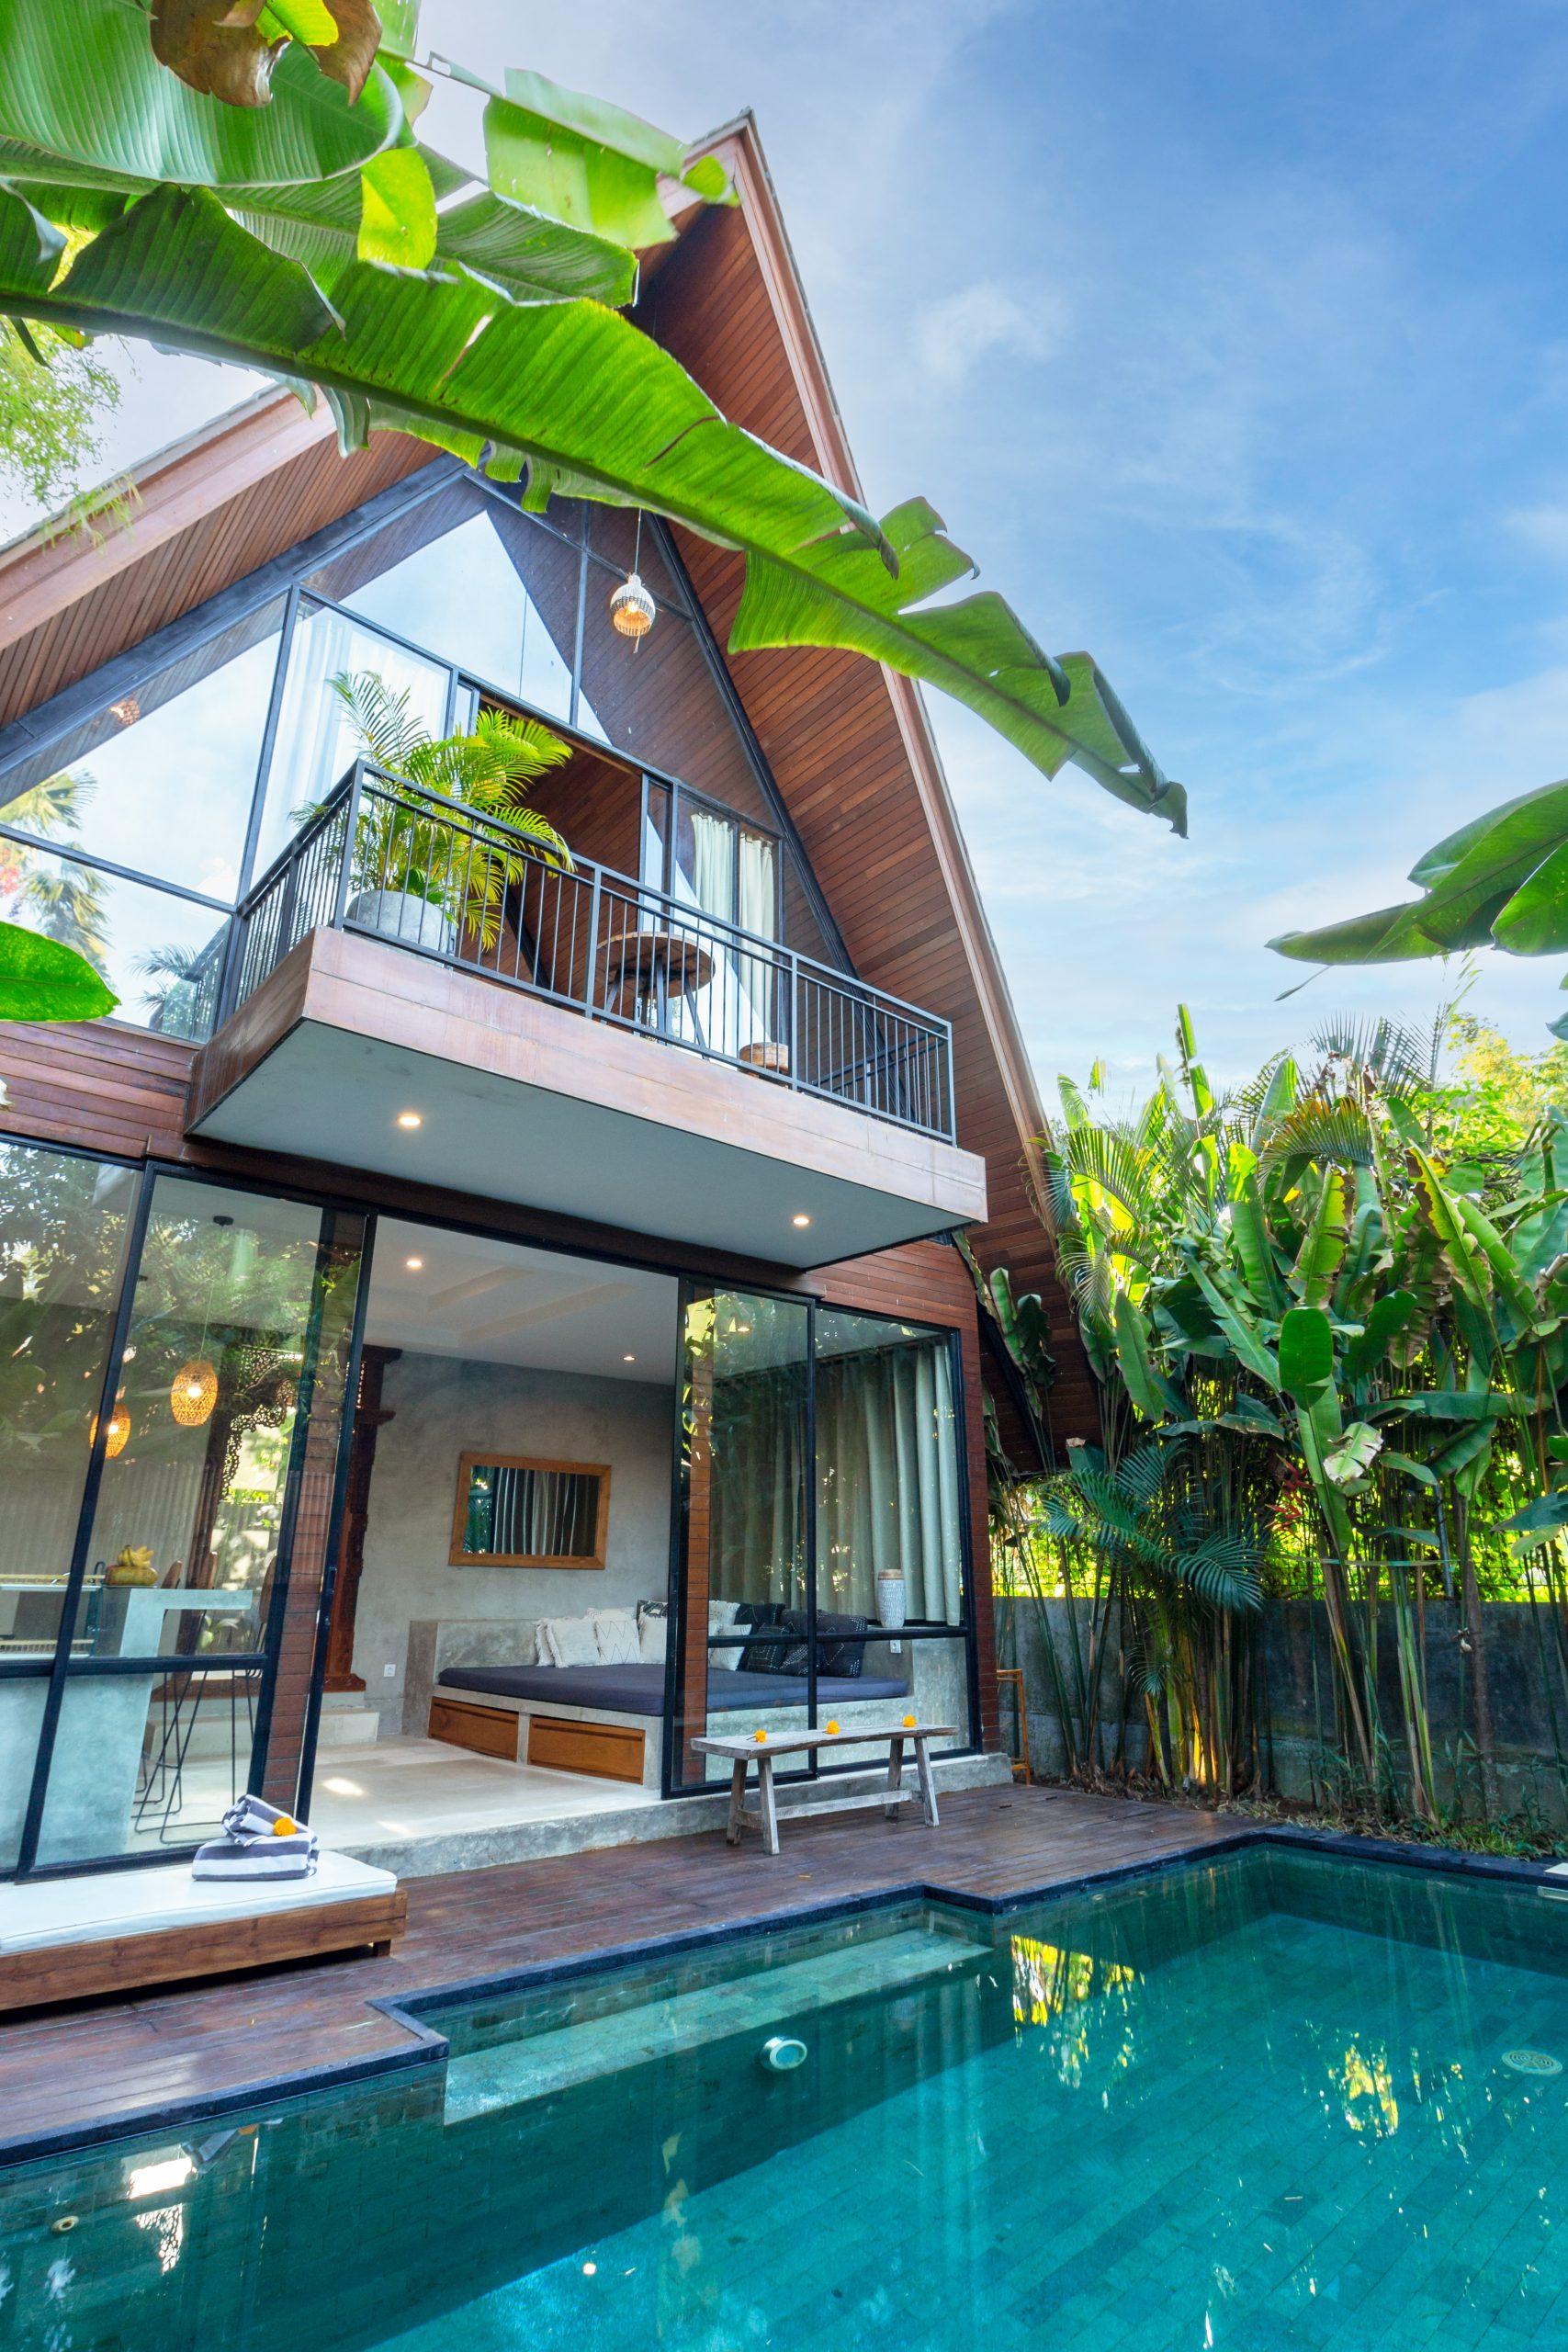 Stunning luxury villa nestled in the serenity of Canggu, Pererenan - your perfect tropical oasis